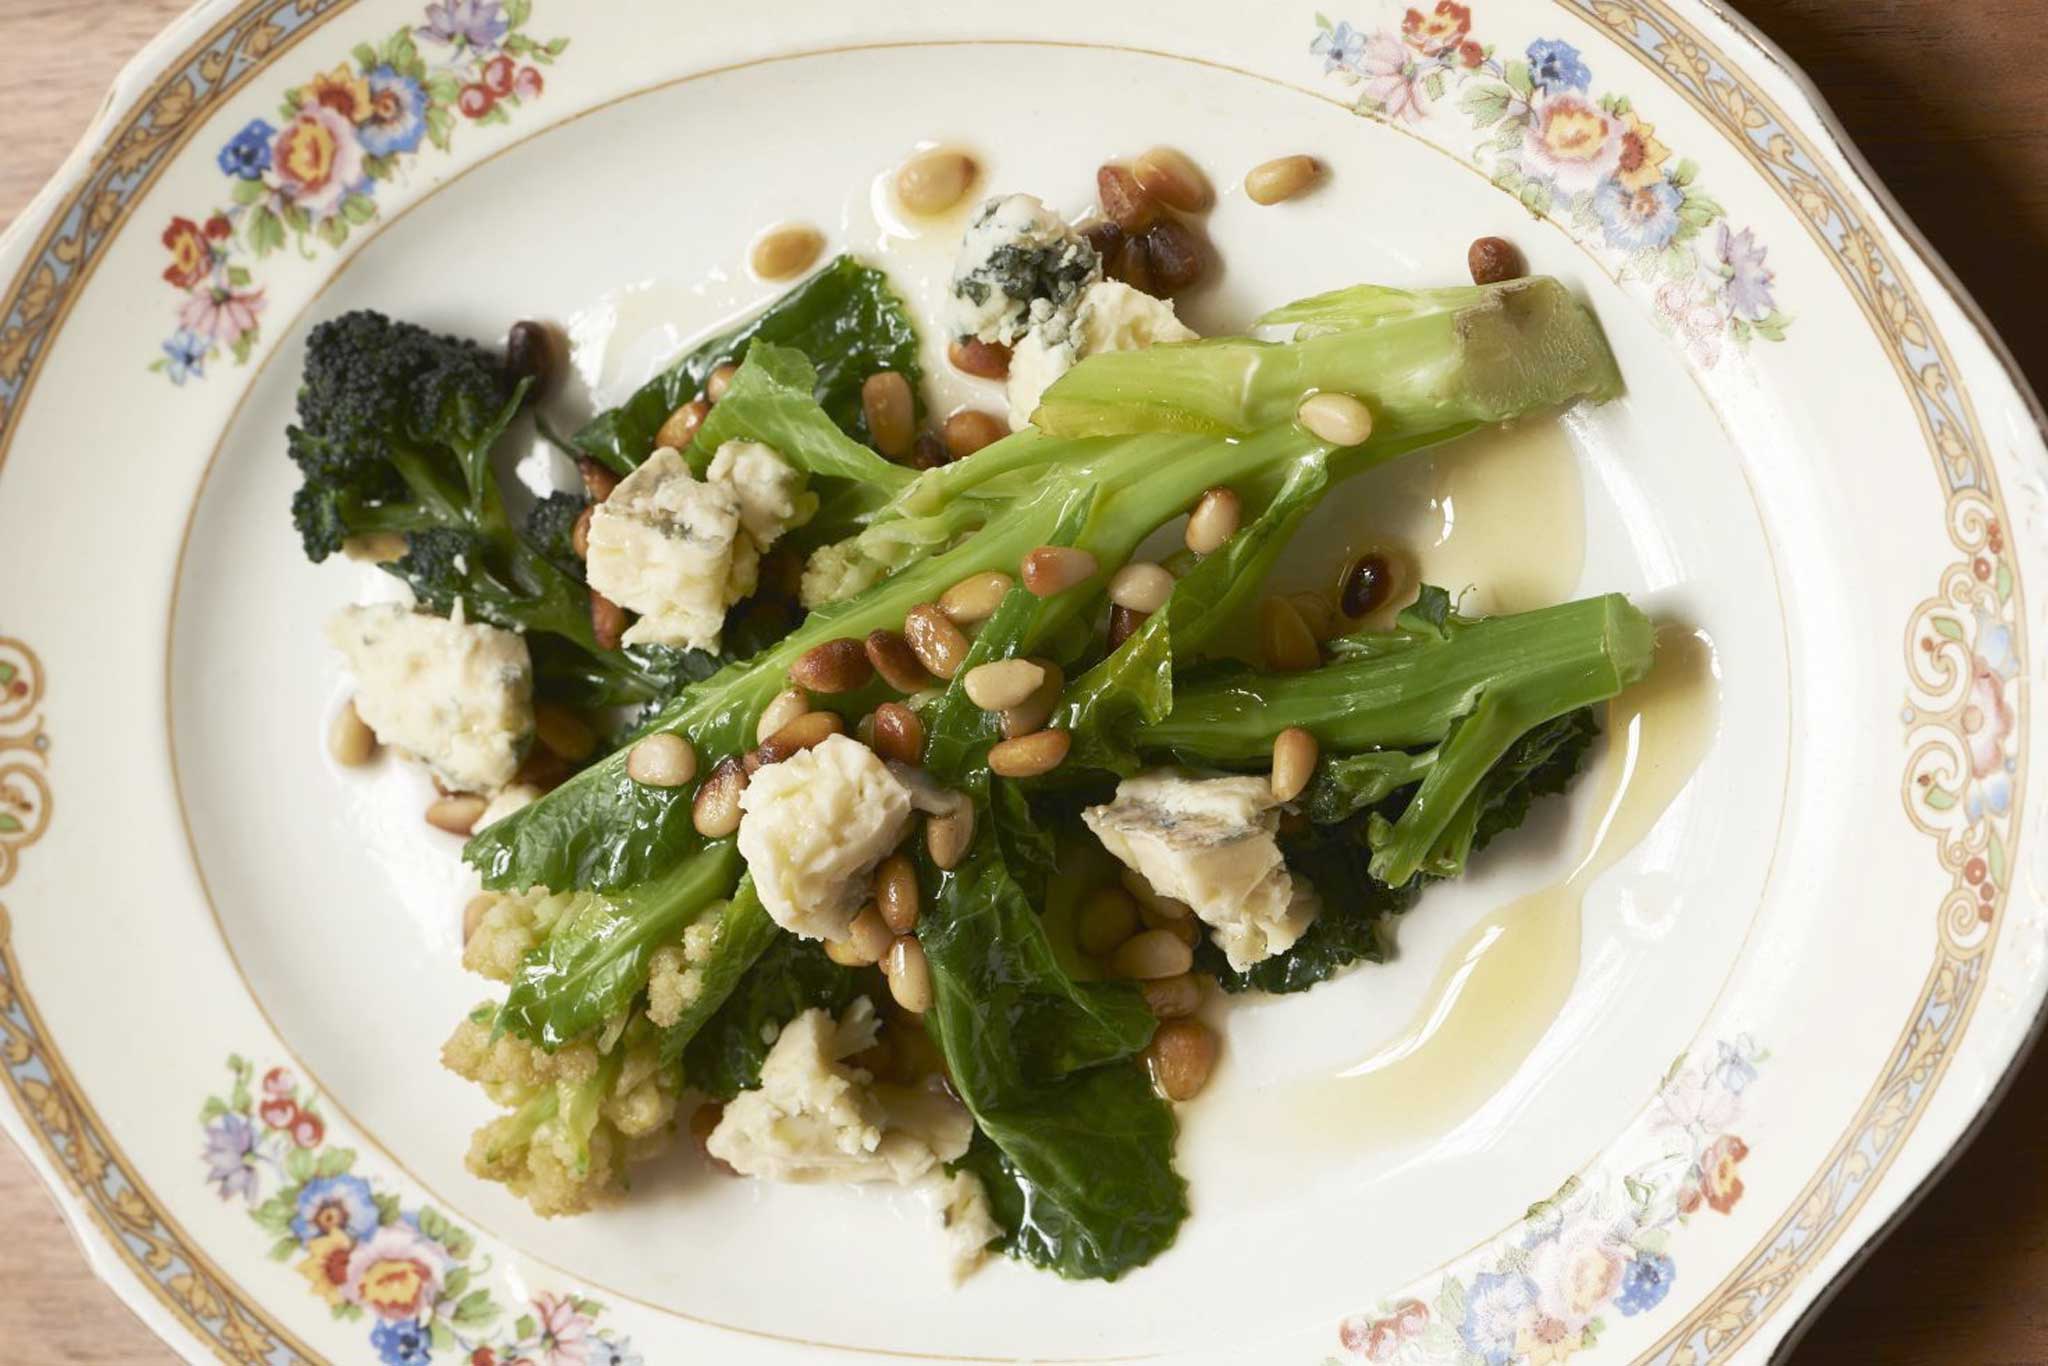 Sprouting broccoli with Gorgonzola and pine nuts